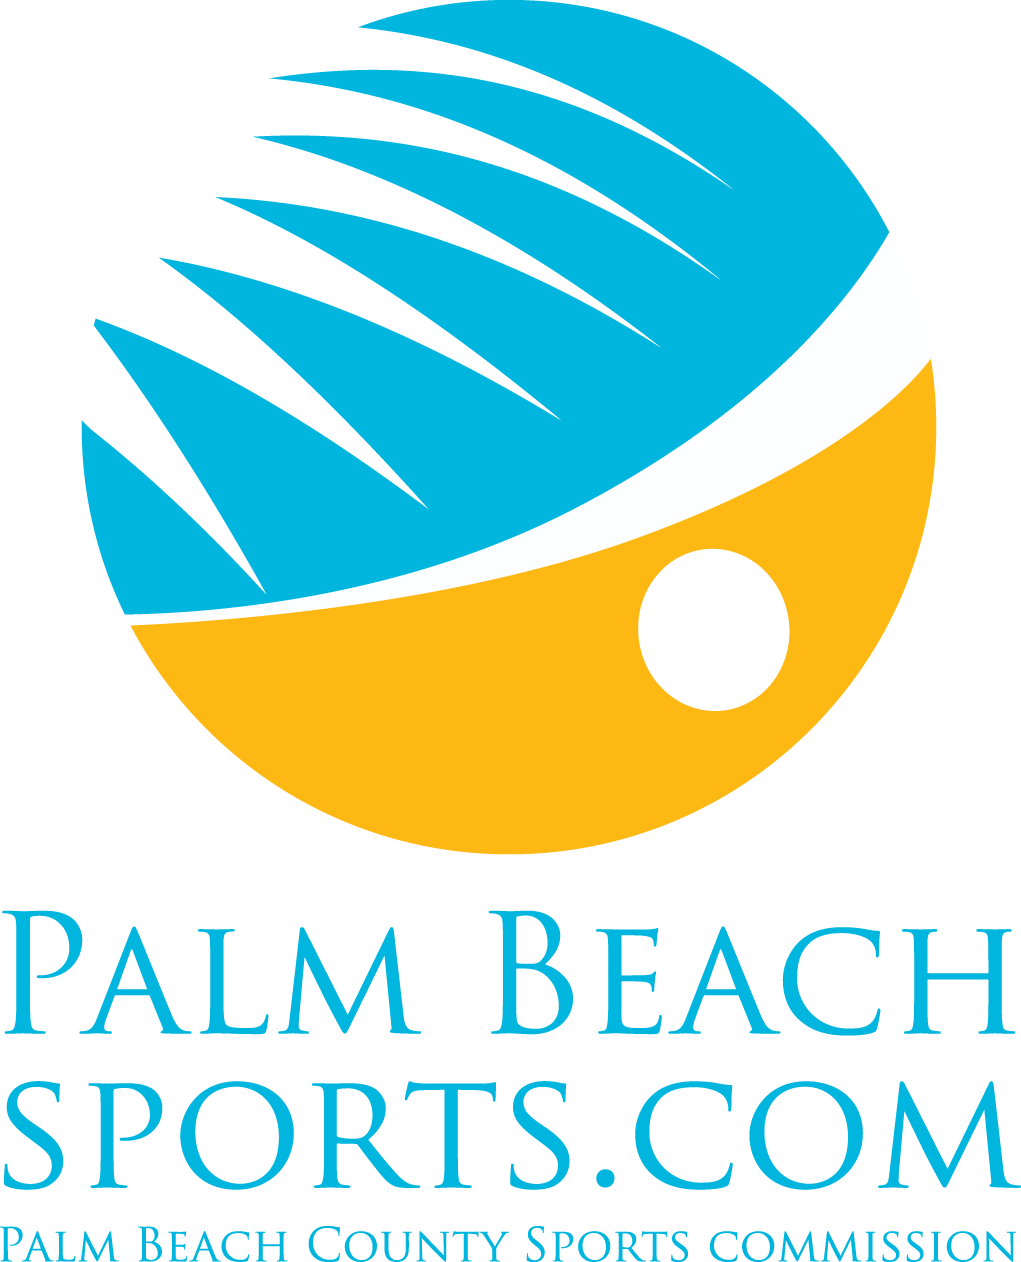 Do Not Modify These Logos In Any Way - Palm Beach County Sports Commission (1021x1262)